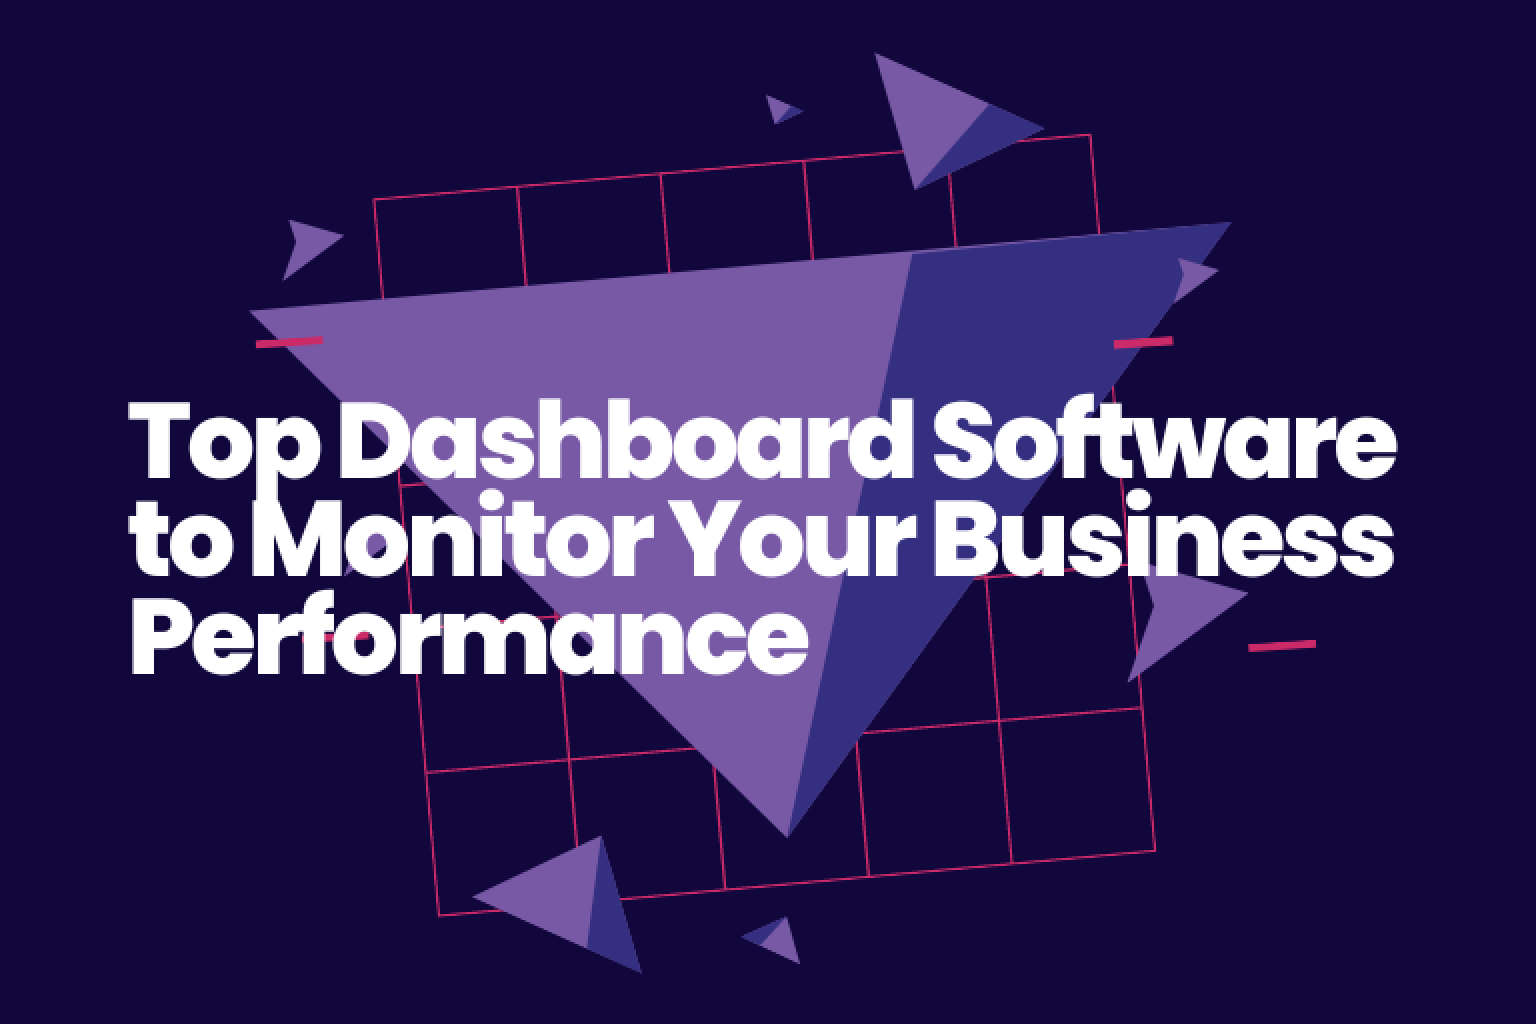 Discover top dashboard software for tracking, visualizing business data in real-time, and making data-driven decisions to optimize your company's performance